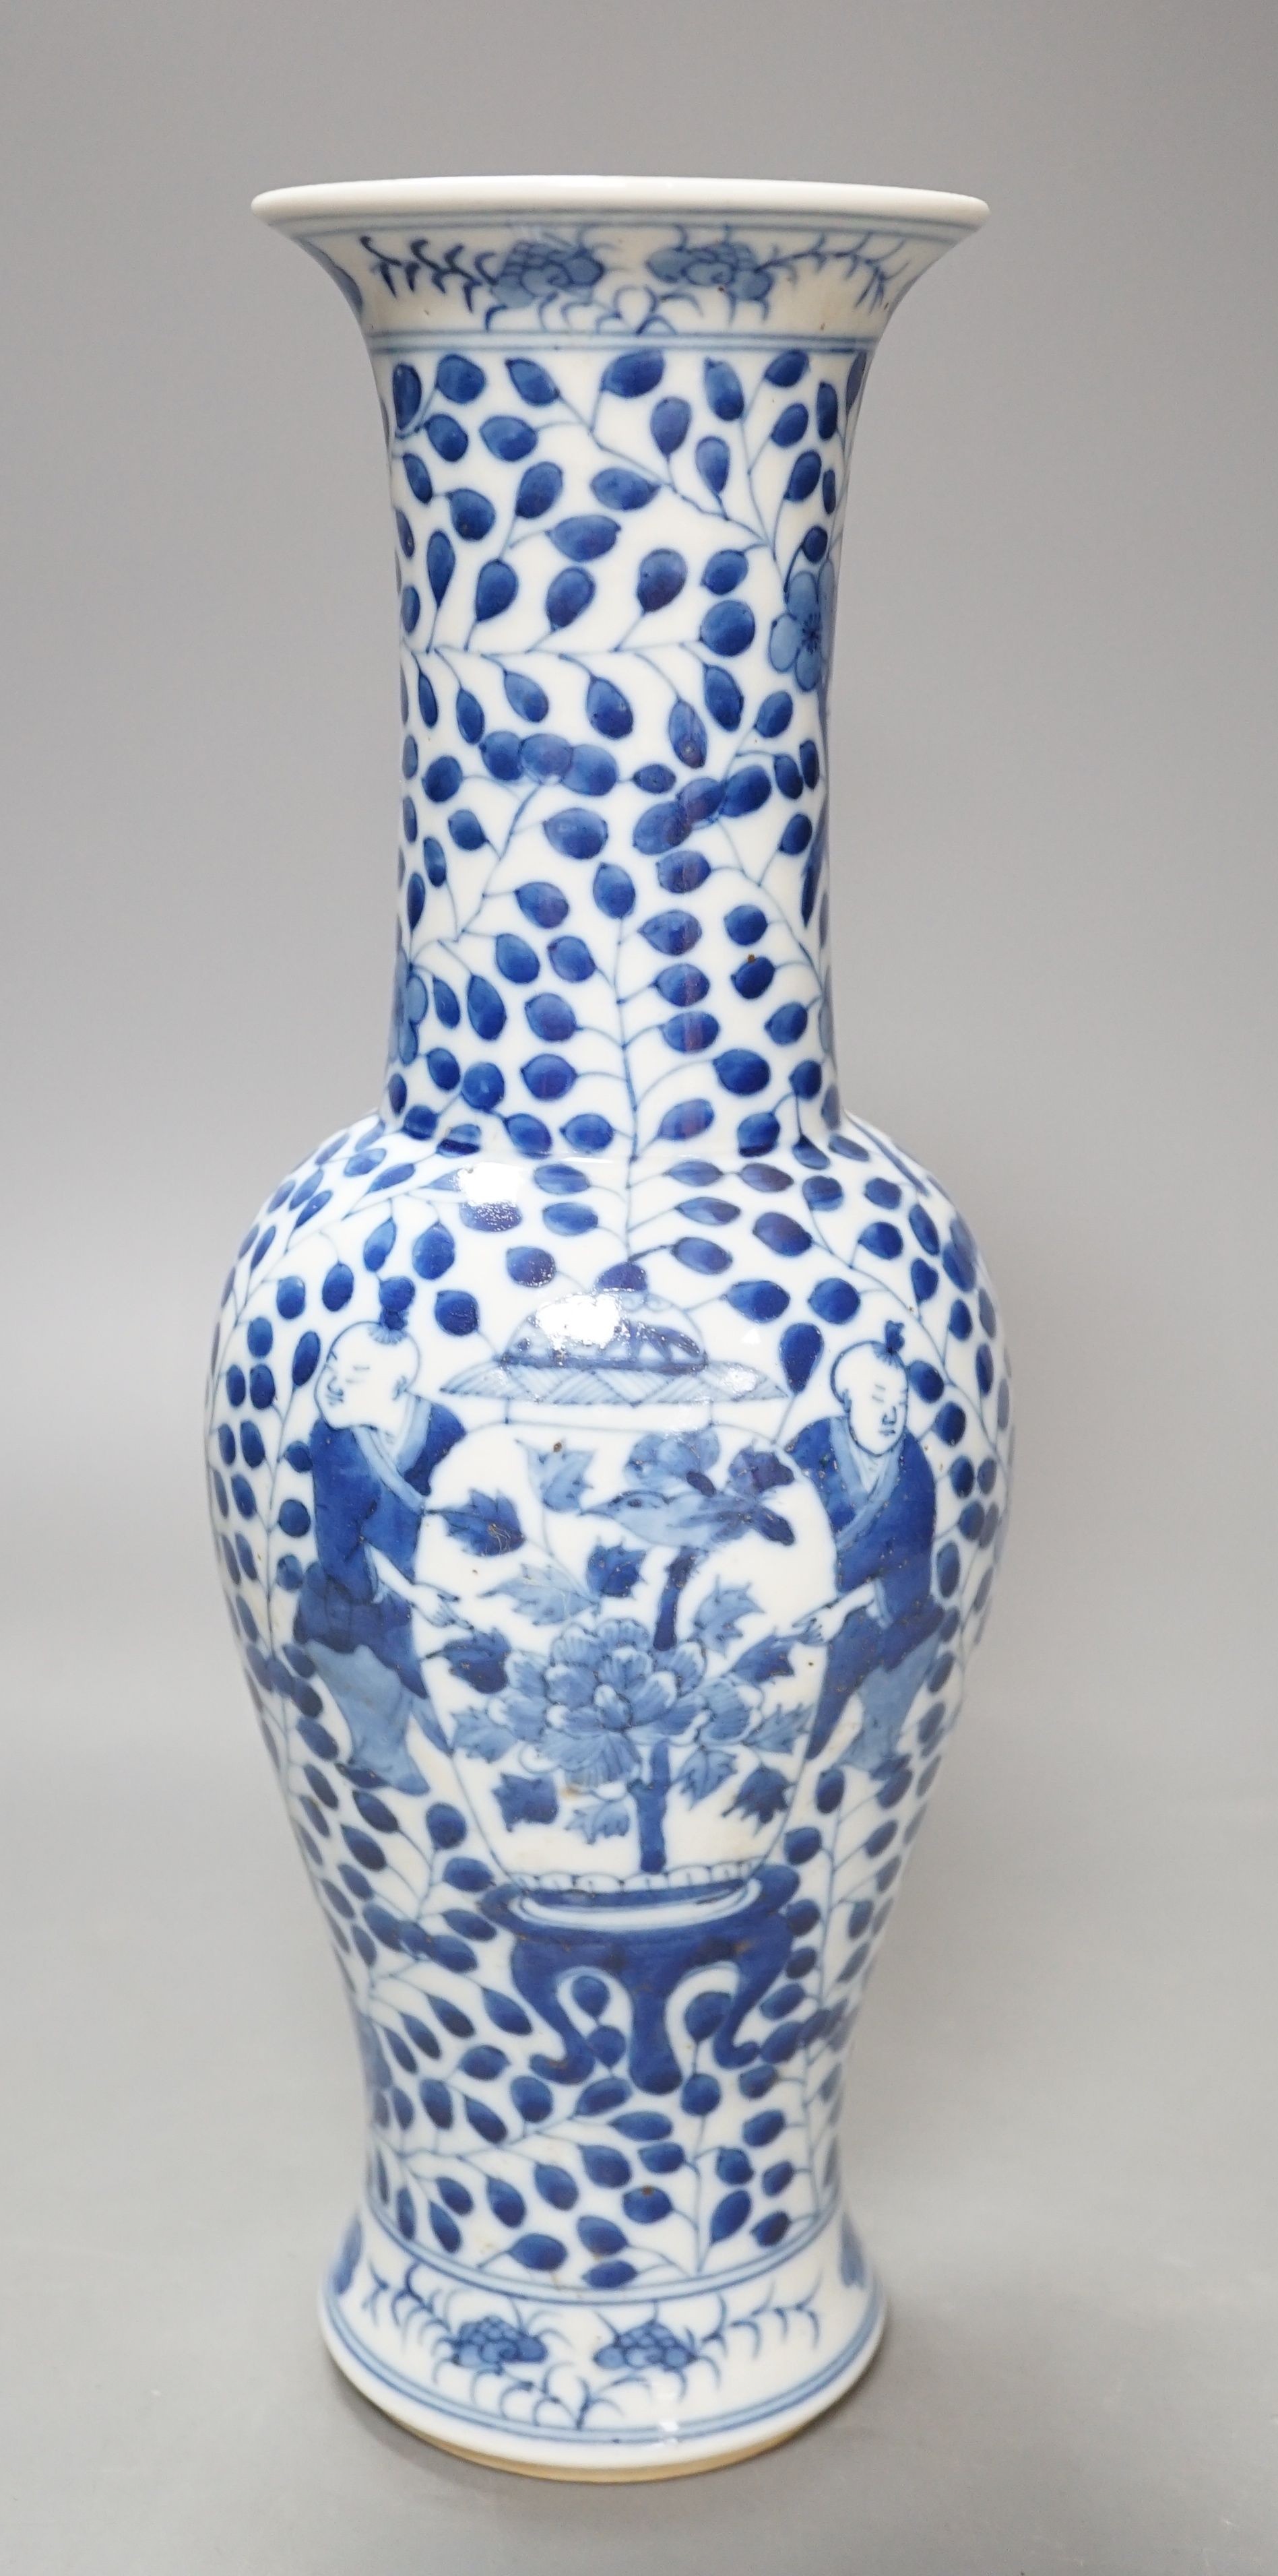 A Chinese blue and white floral vase - 31.5cm tall